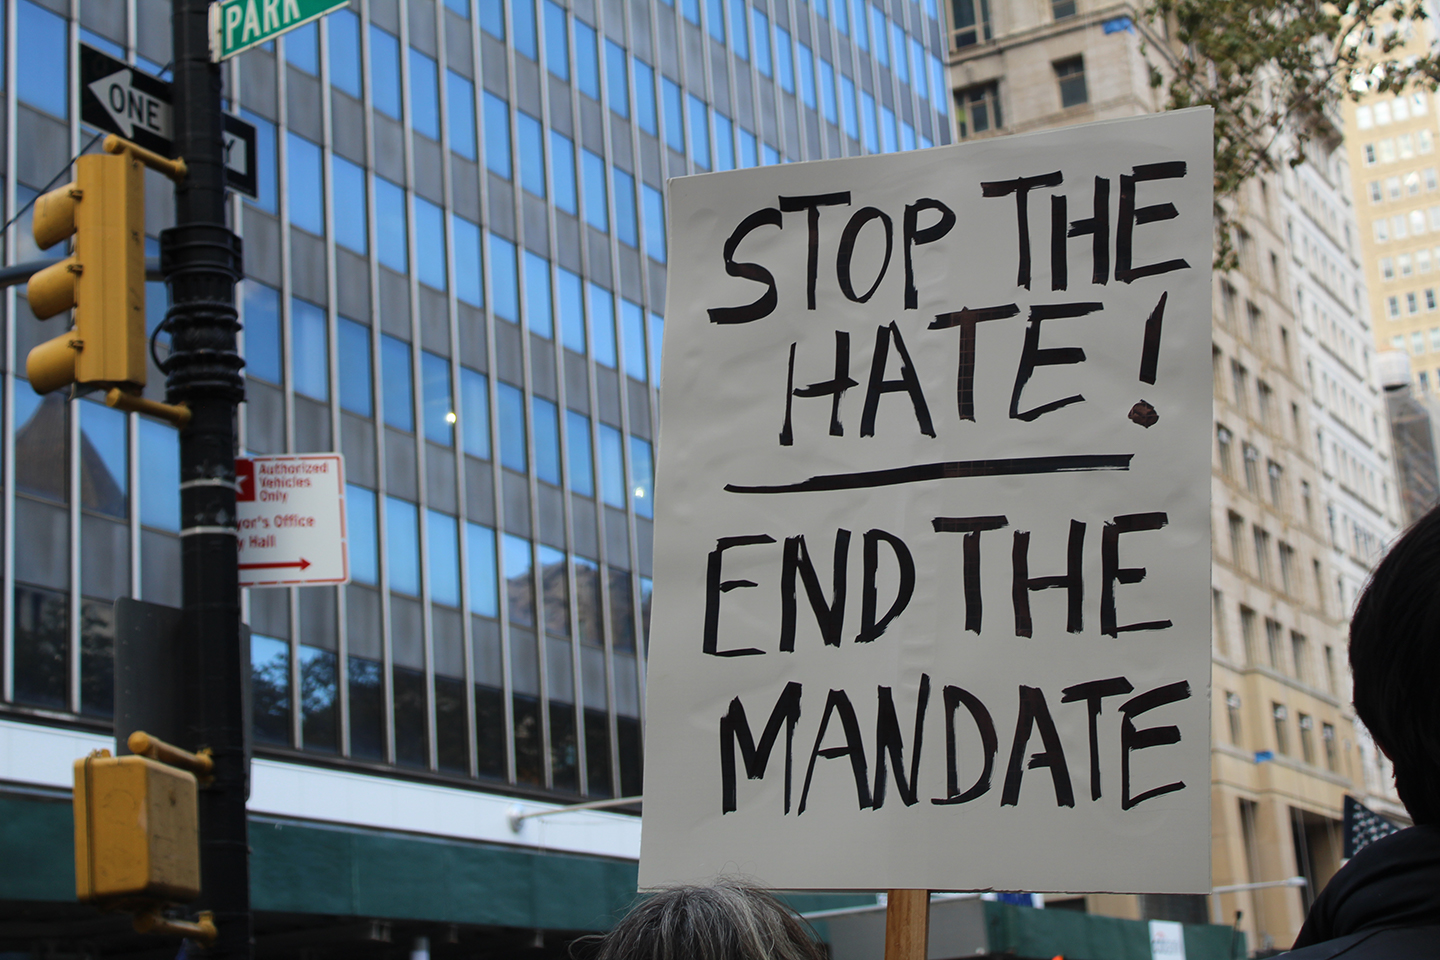 A poster reads "Stop the hate! End the mandate"